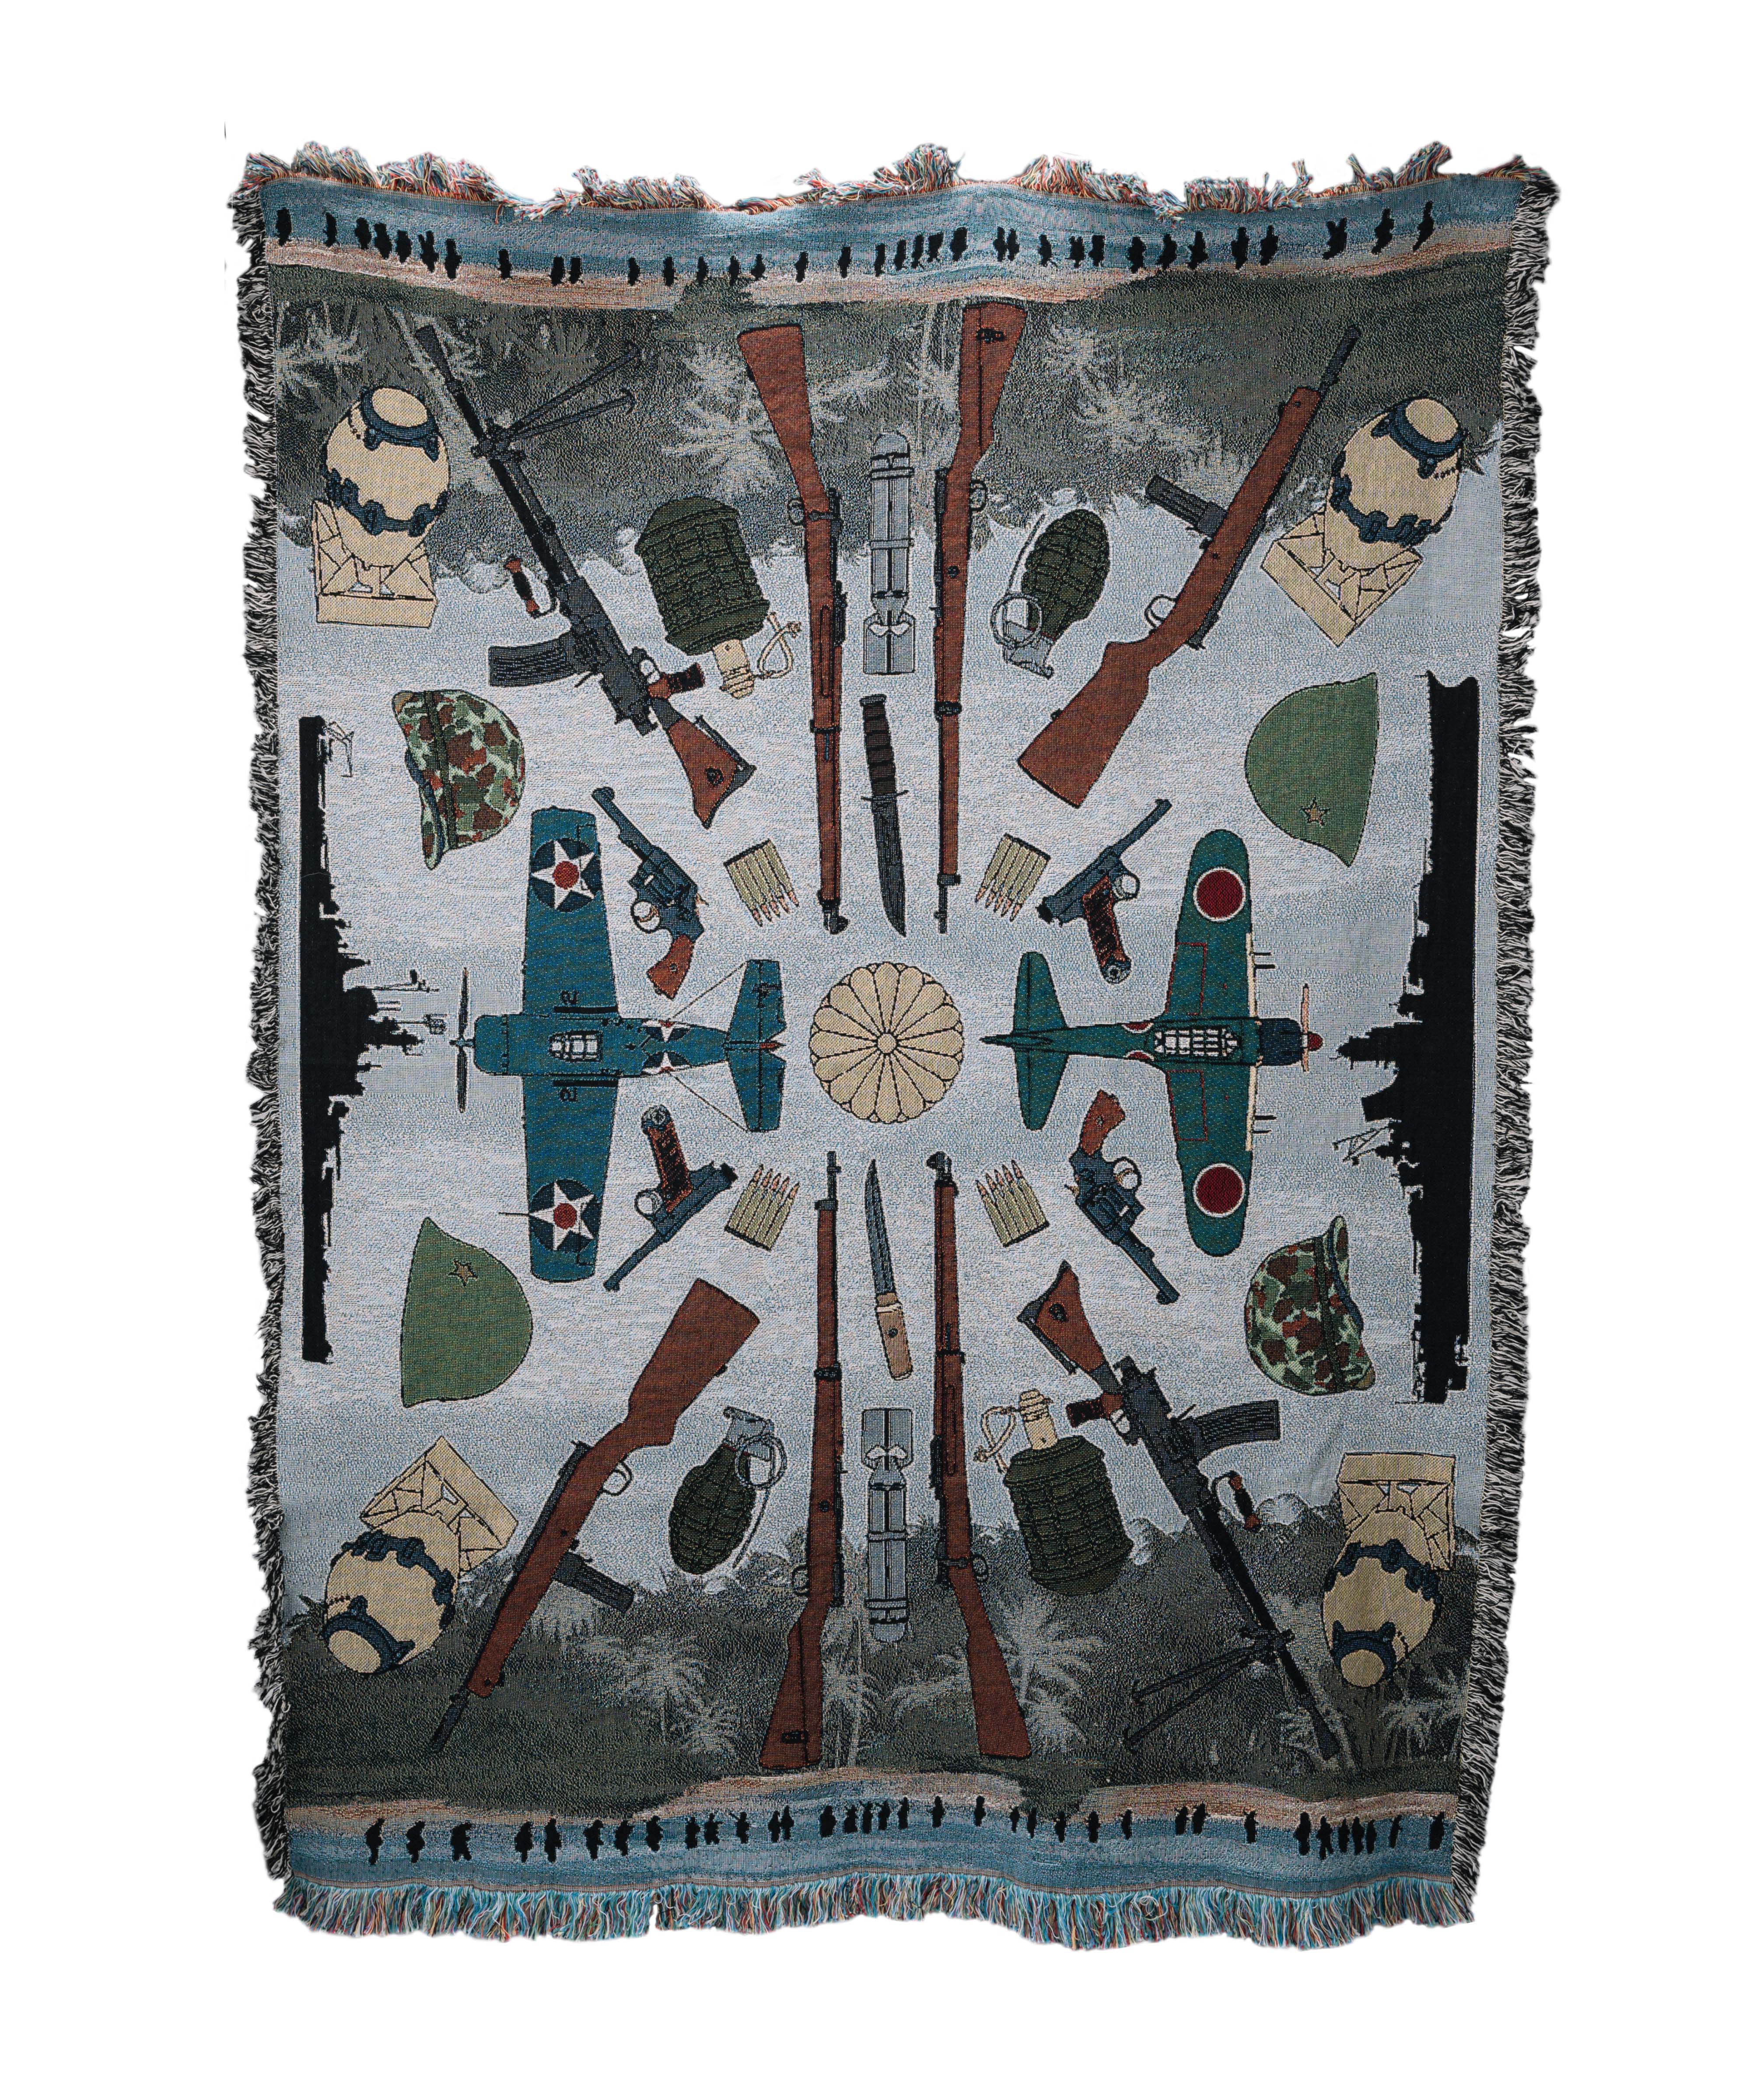 The Pacific Theater Throw Blanket